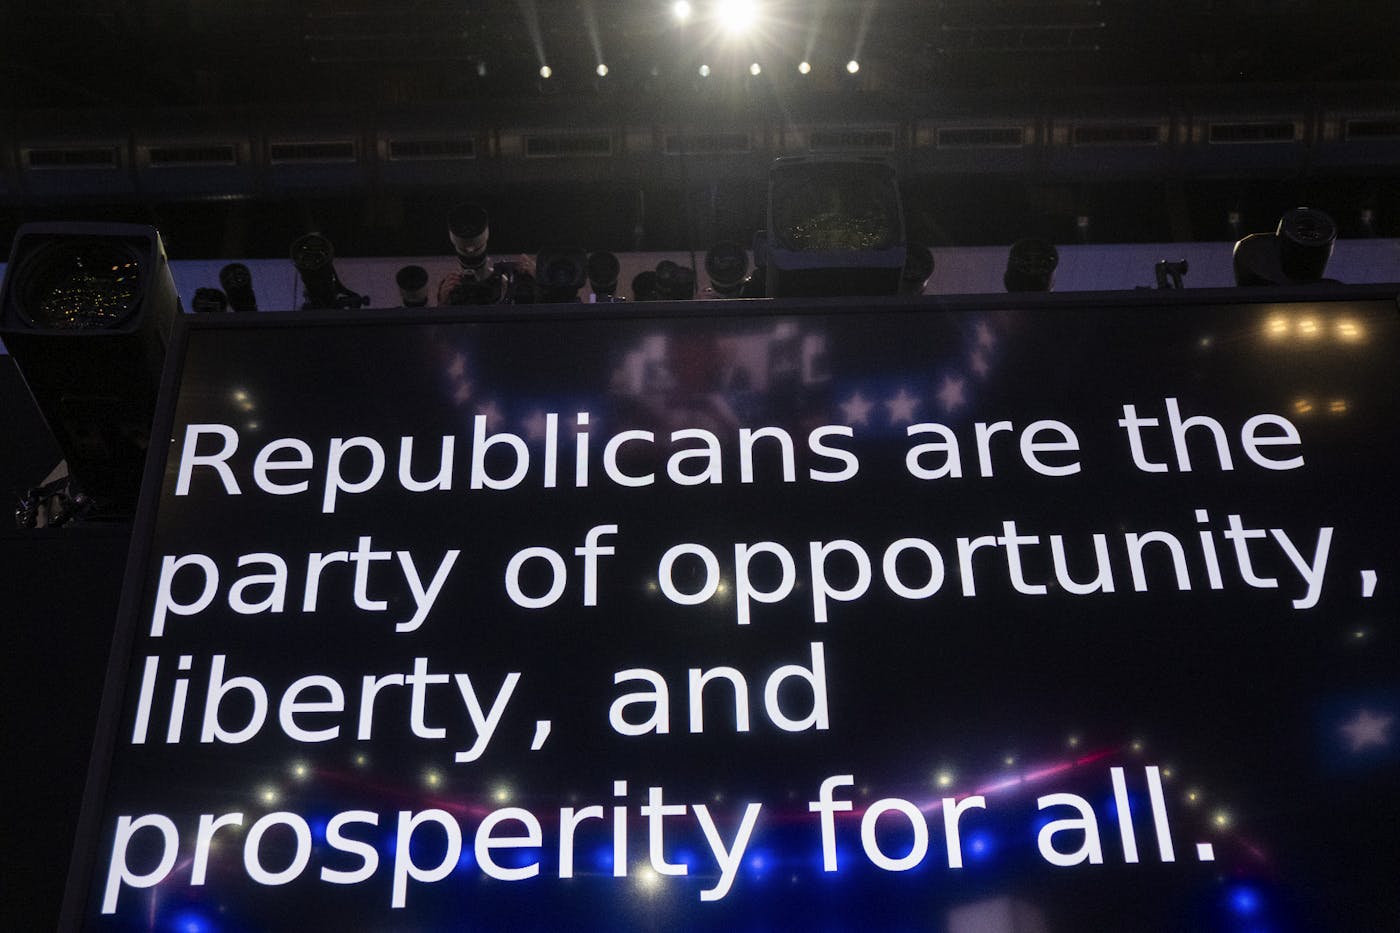 A giant screen displays the text Republicans are the party of oppoprtunity, liberty, and prosperity for all 